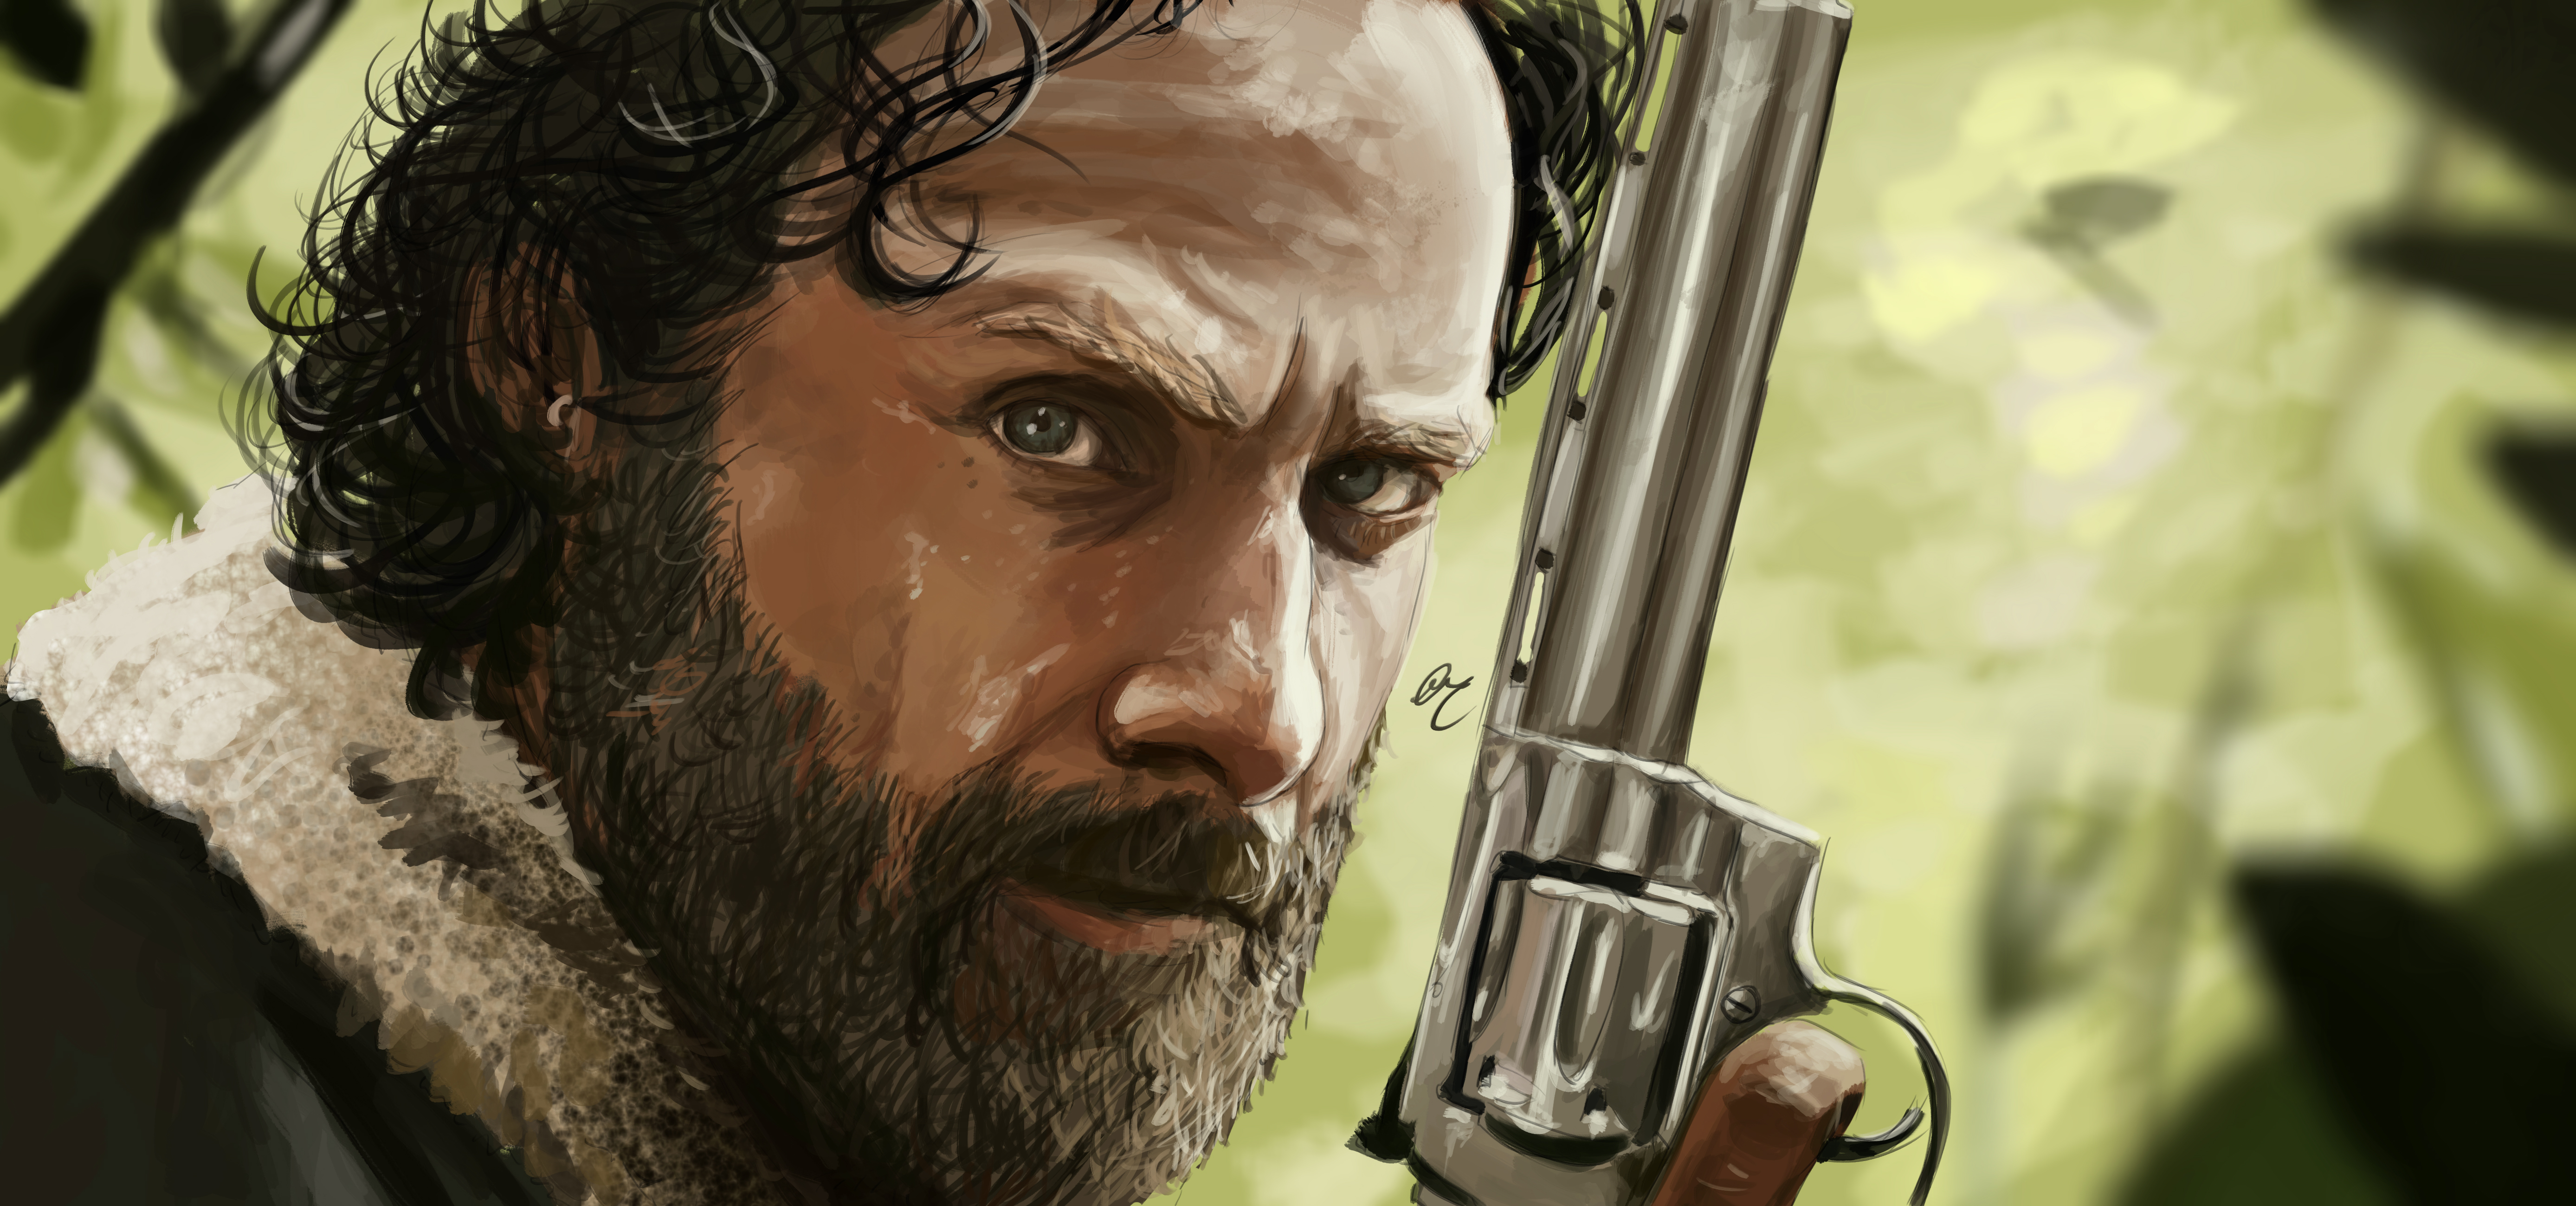 Rick Walking Dead 5k Artwork 2048x1152 Resolution HD 4k Wallpaper, Image, Background, Photo and Picture